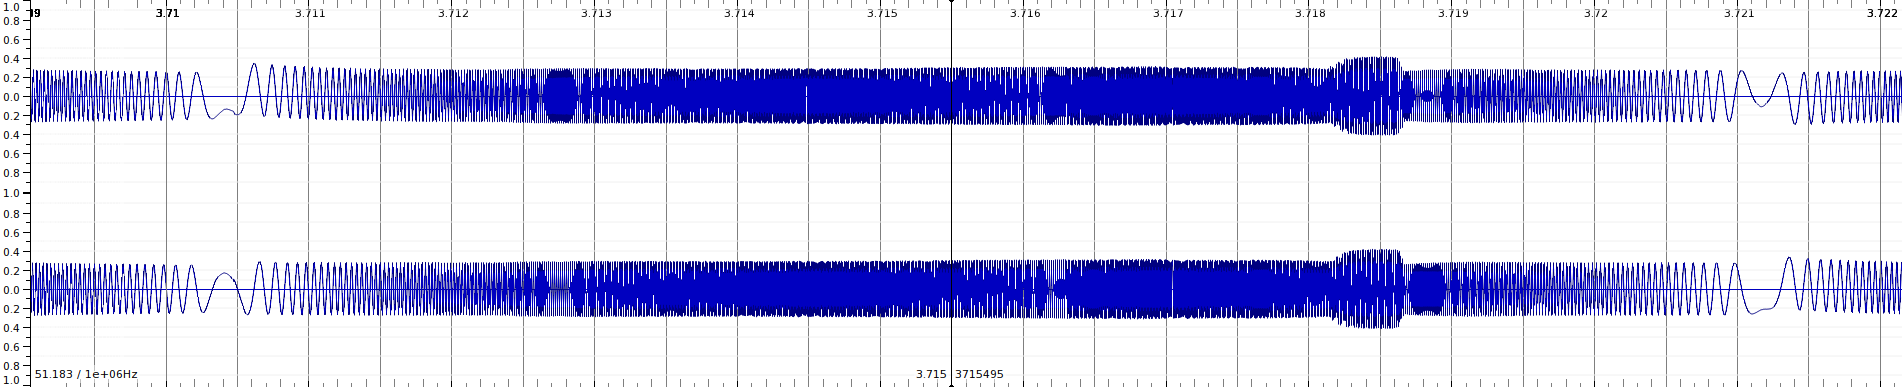 Waveform zoomed in to show the individual squiggles getting closer together and farther apart over time in both channels